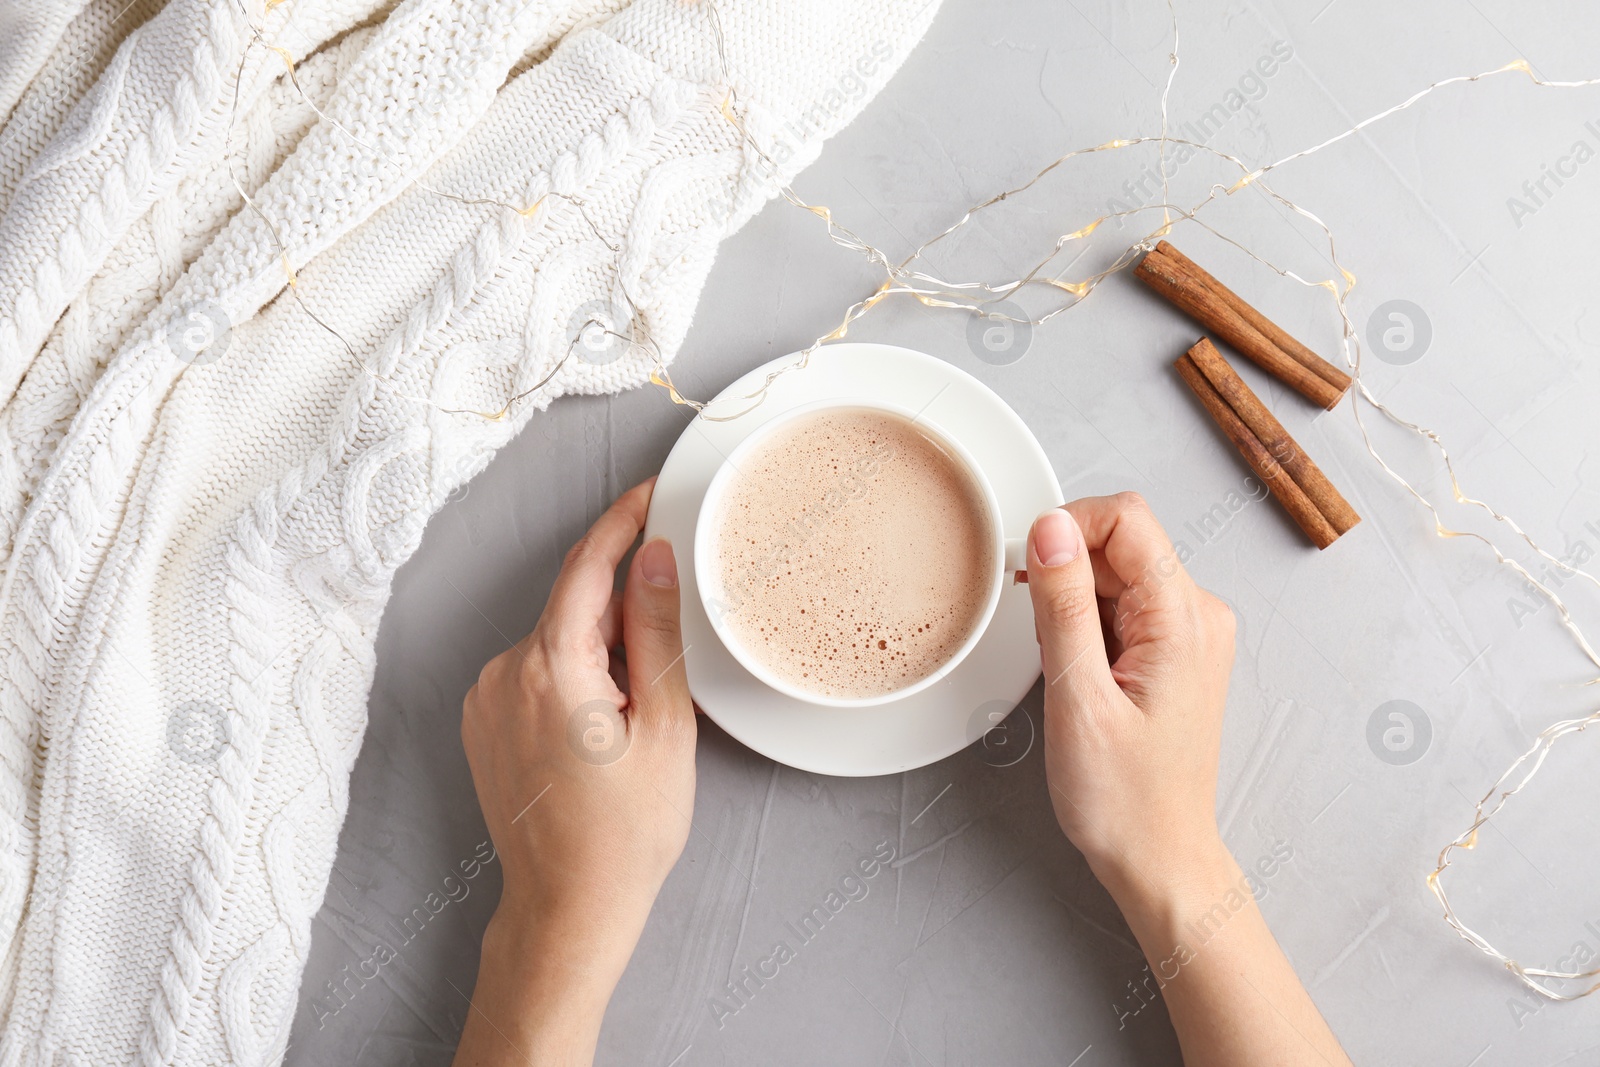 Photo of Woman with delicious hot cocoa drink at table, top view